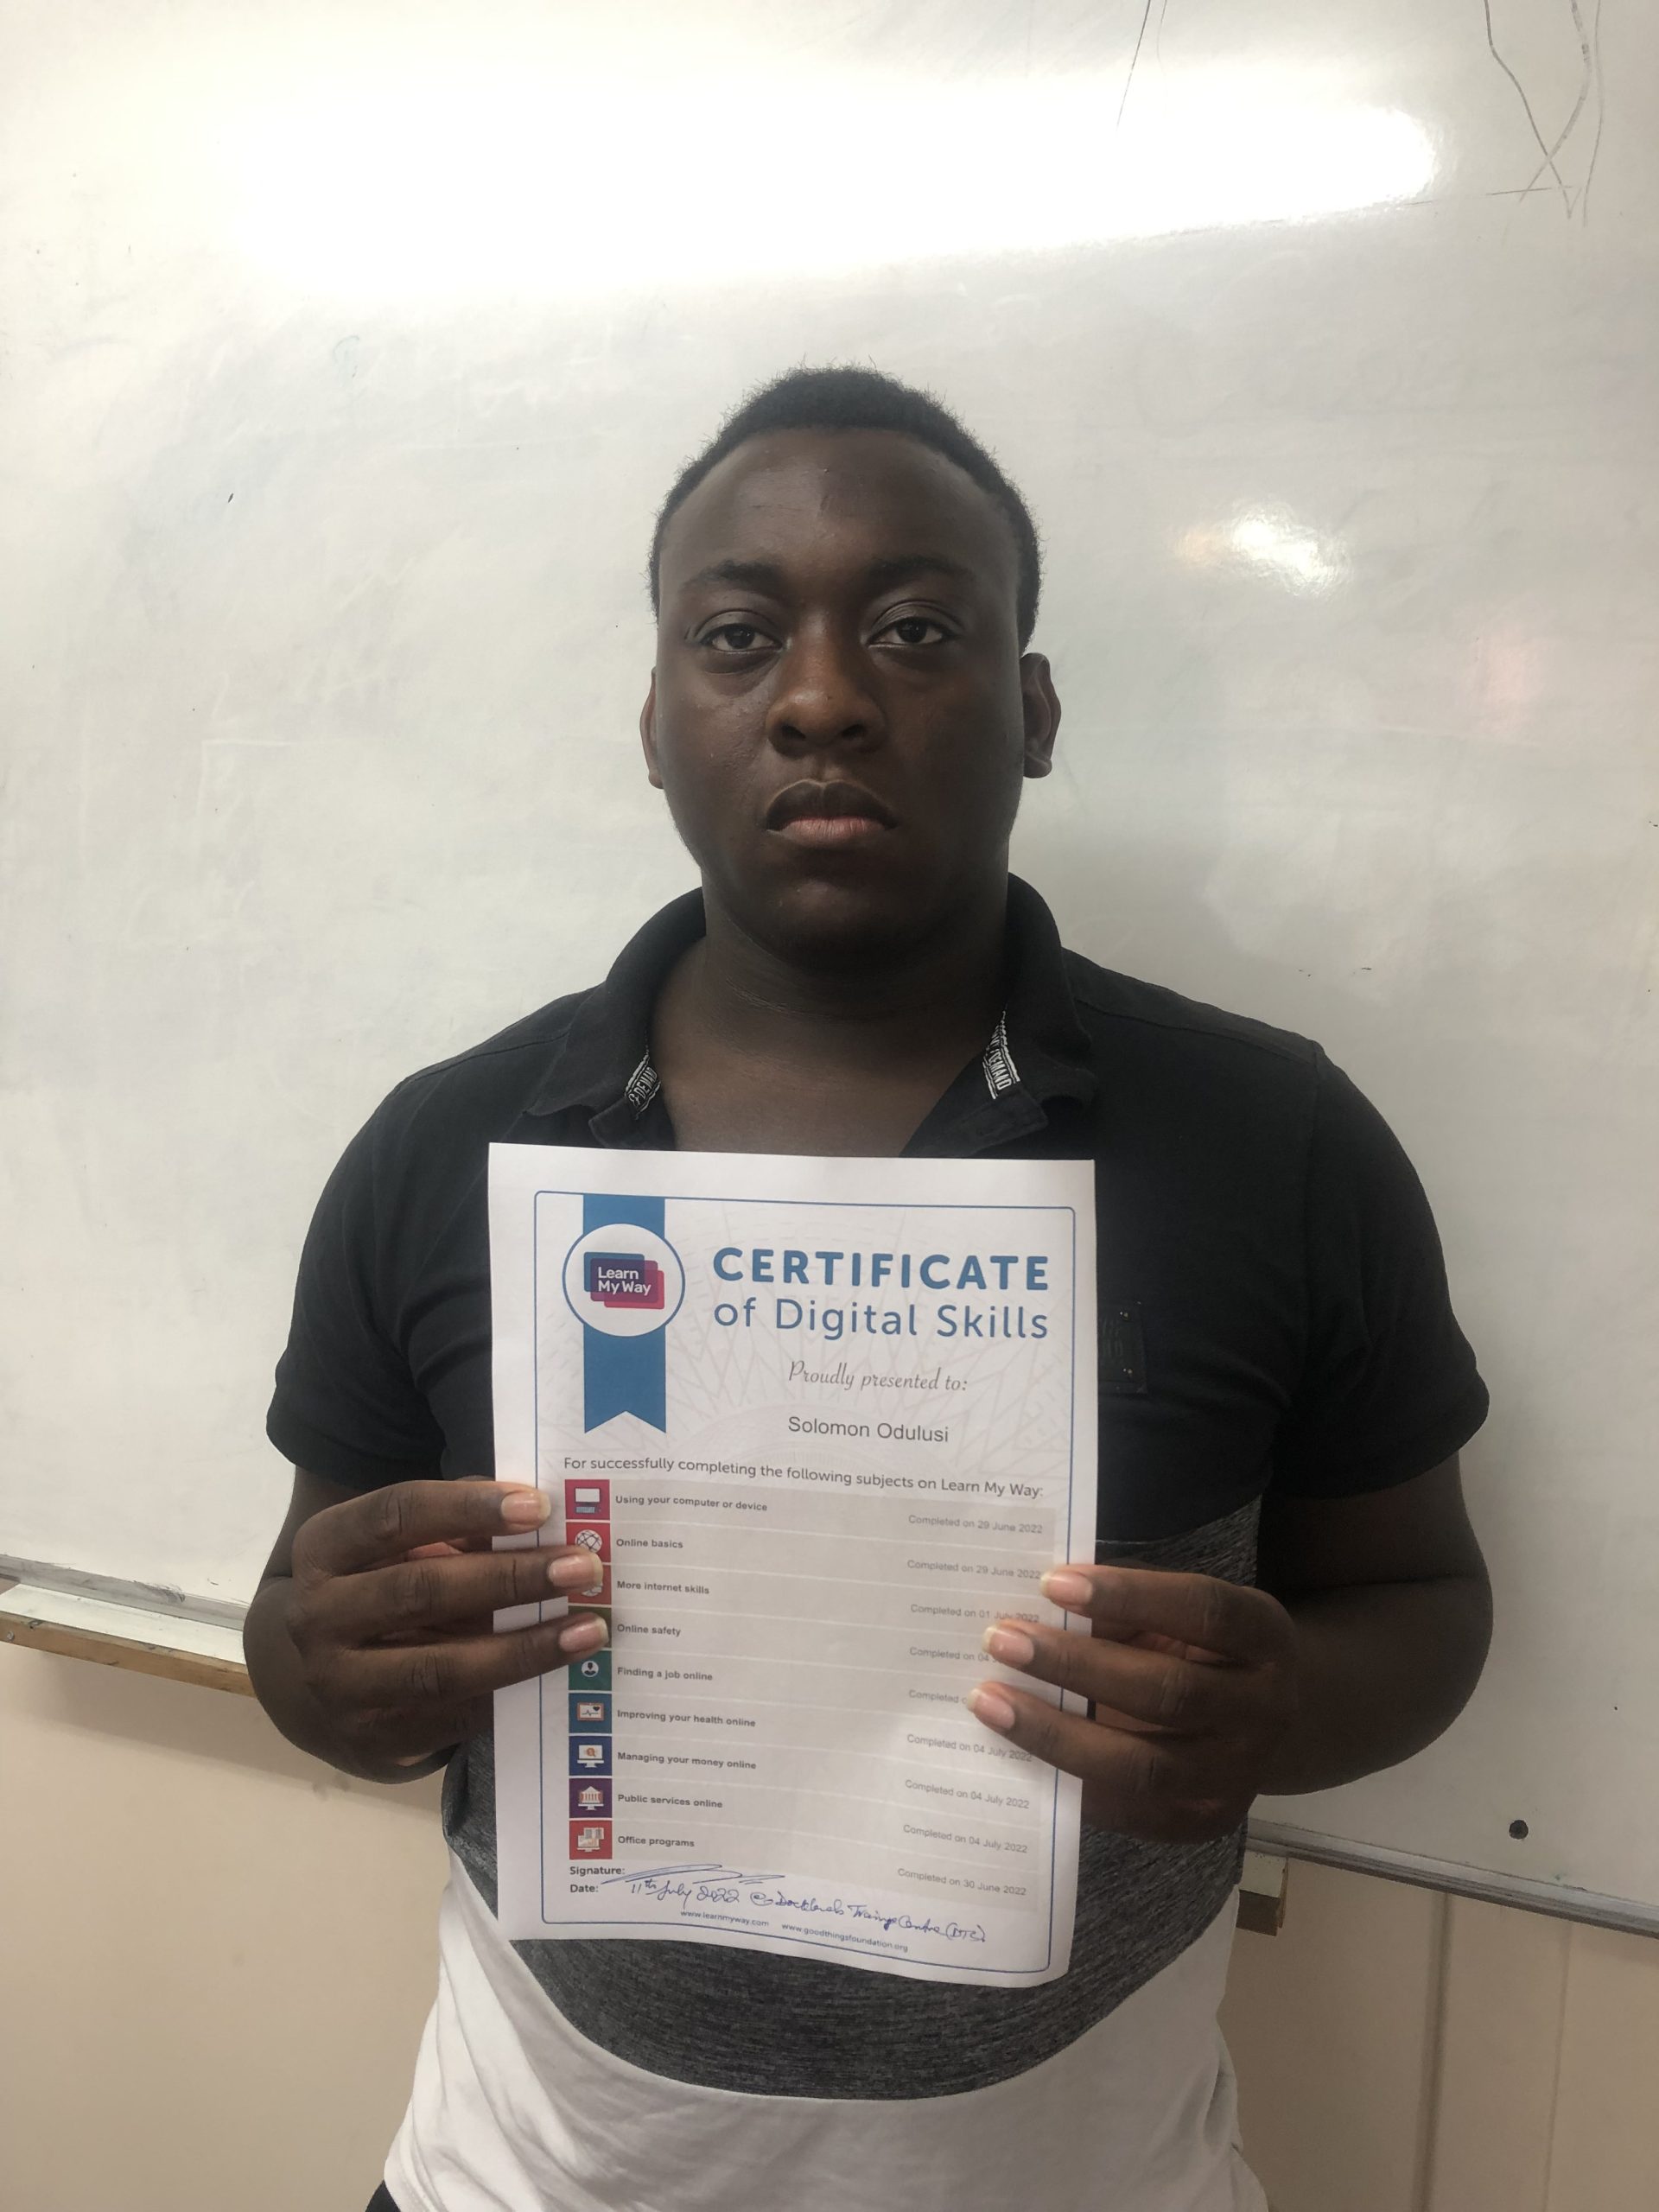 Student with learn my way certificate